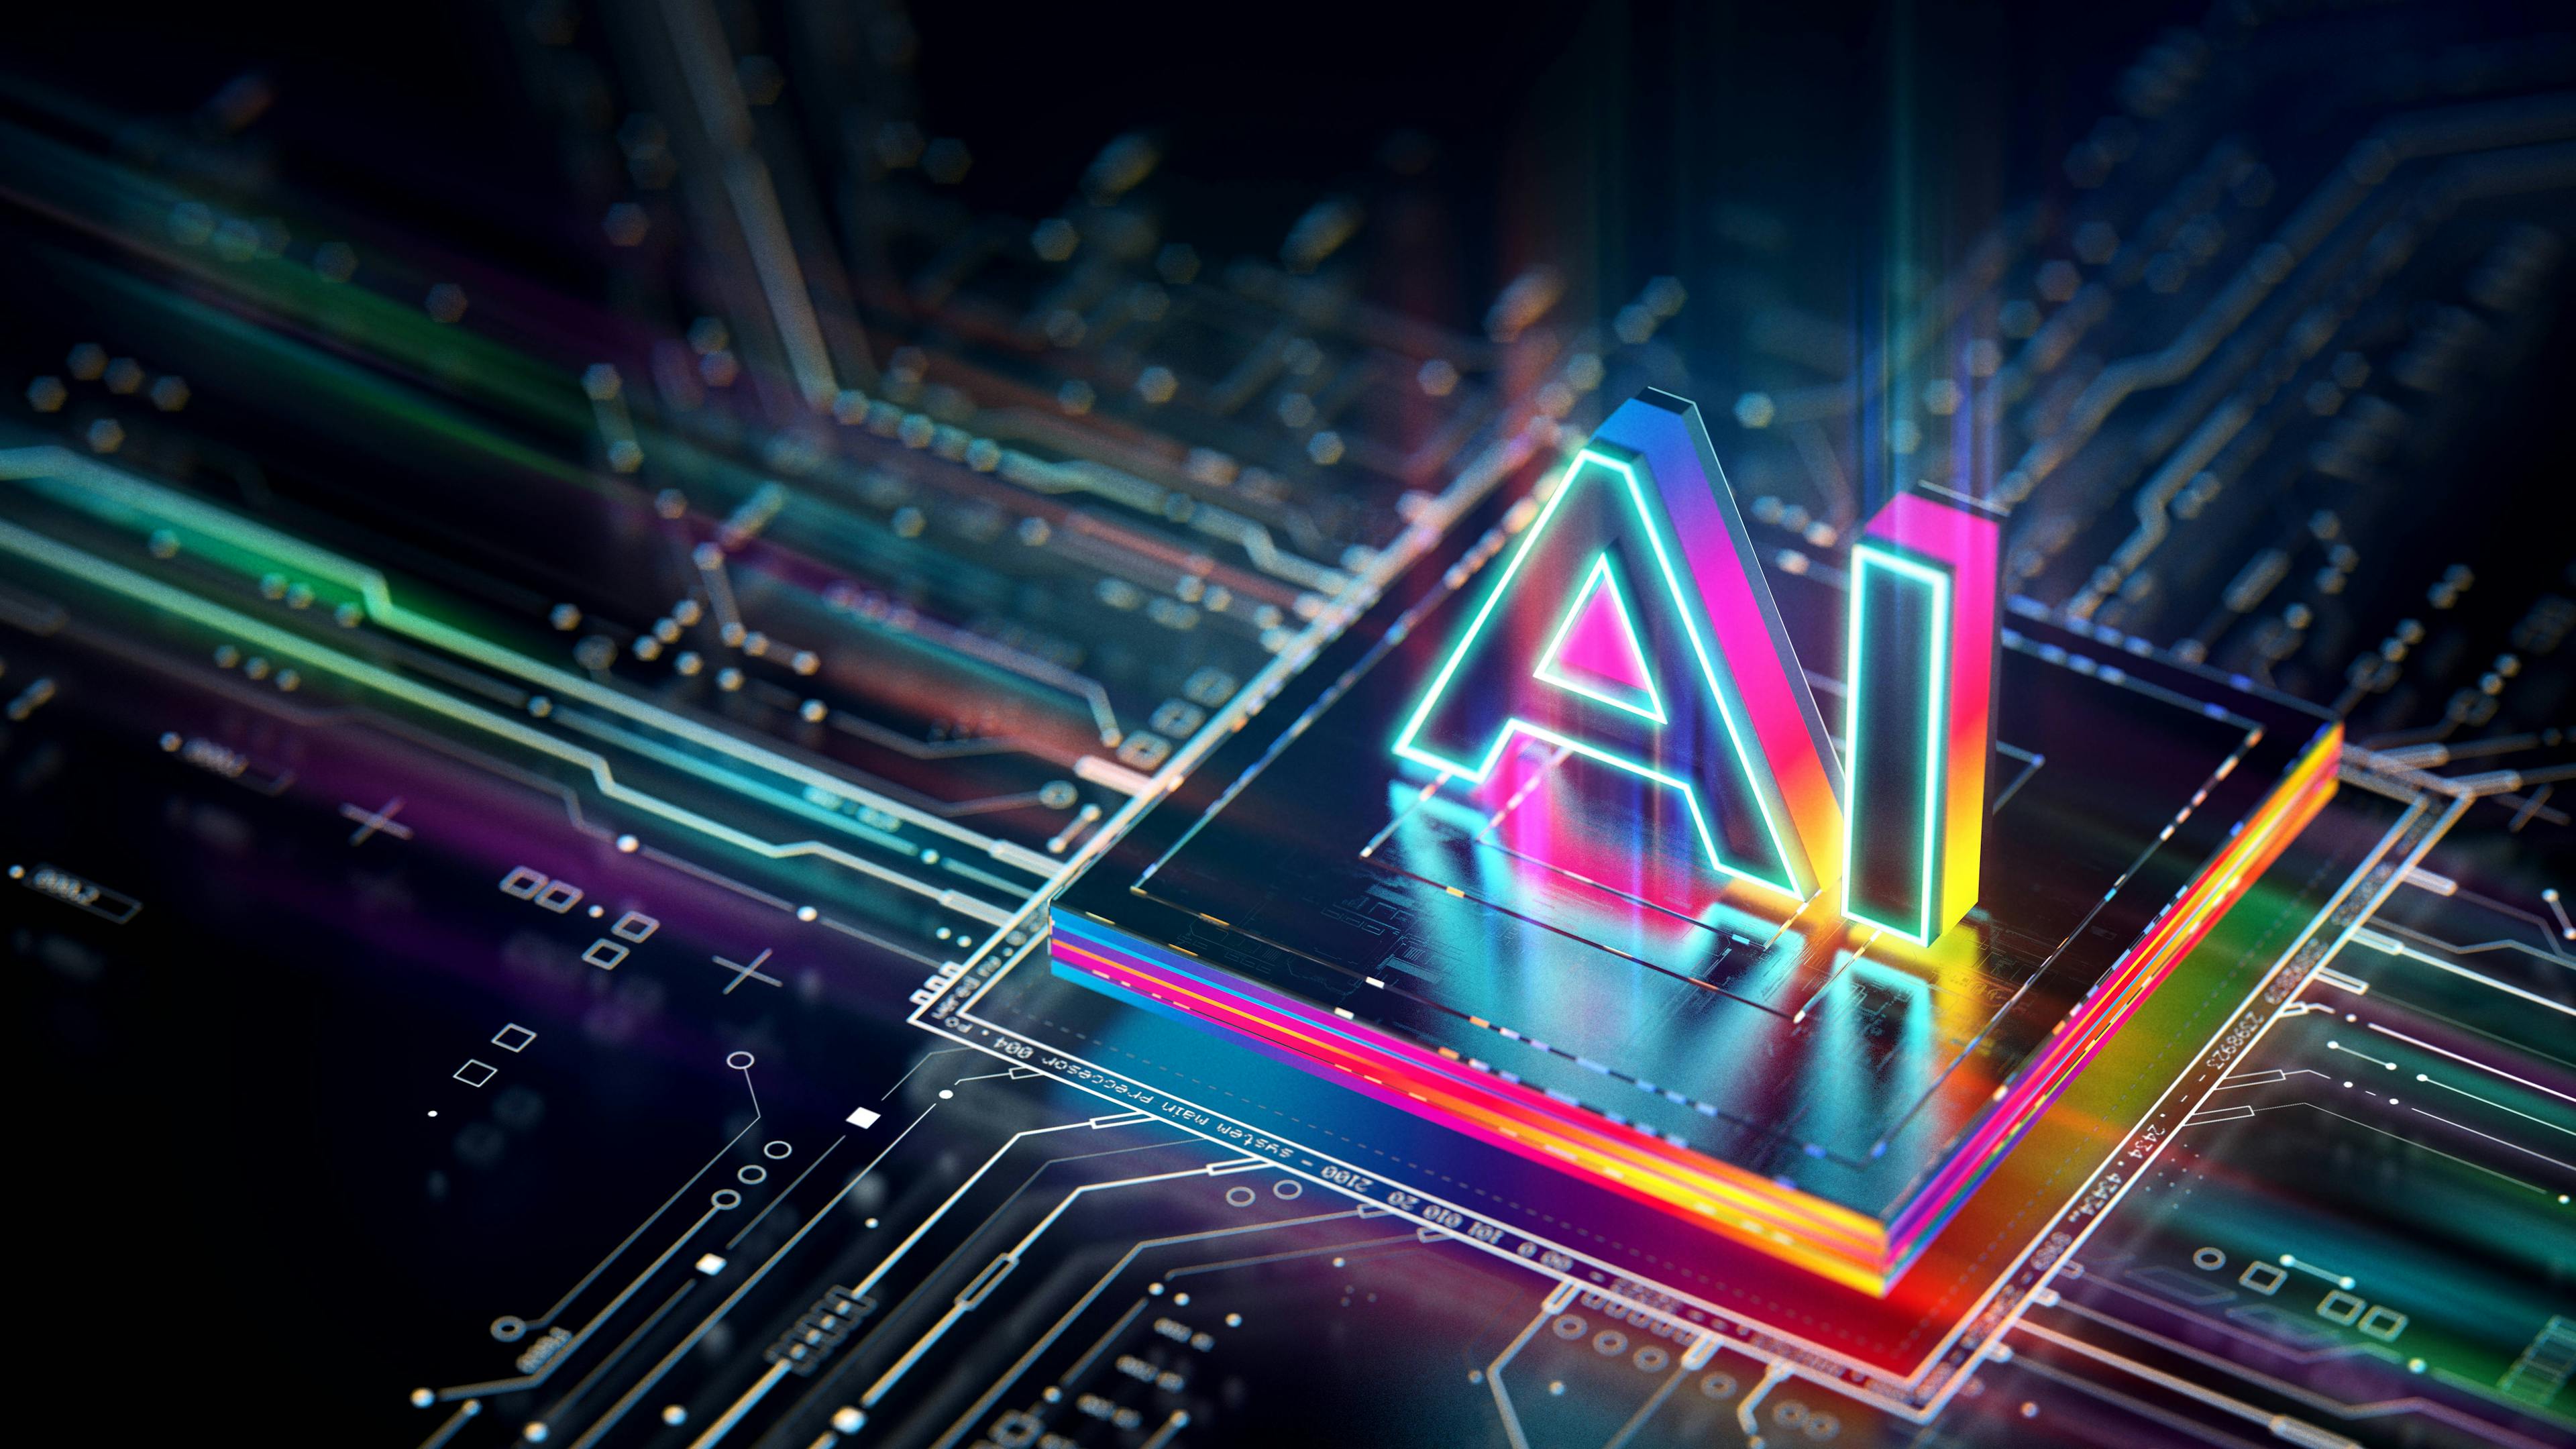 The letters “AI” in digital form sitting on top of a semicoductor